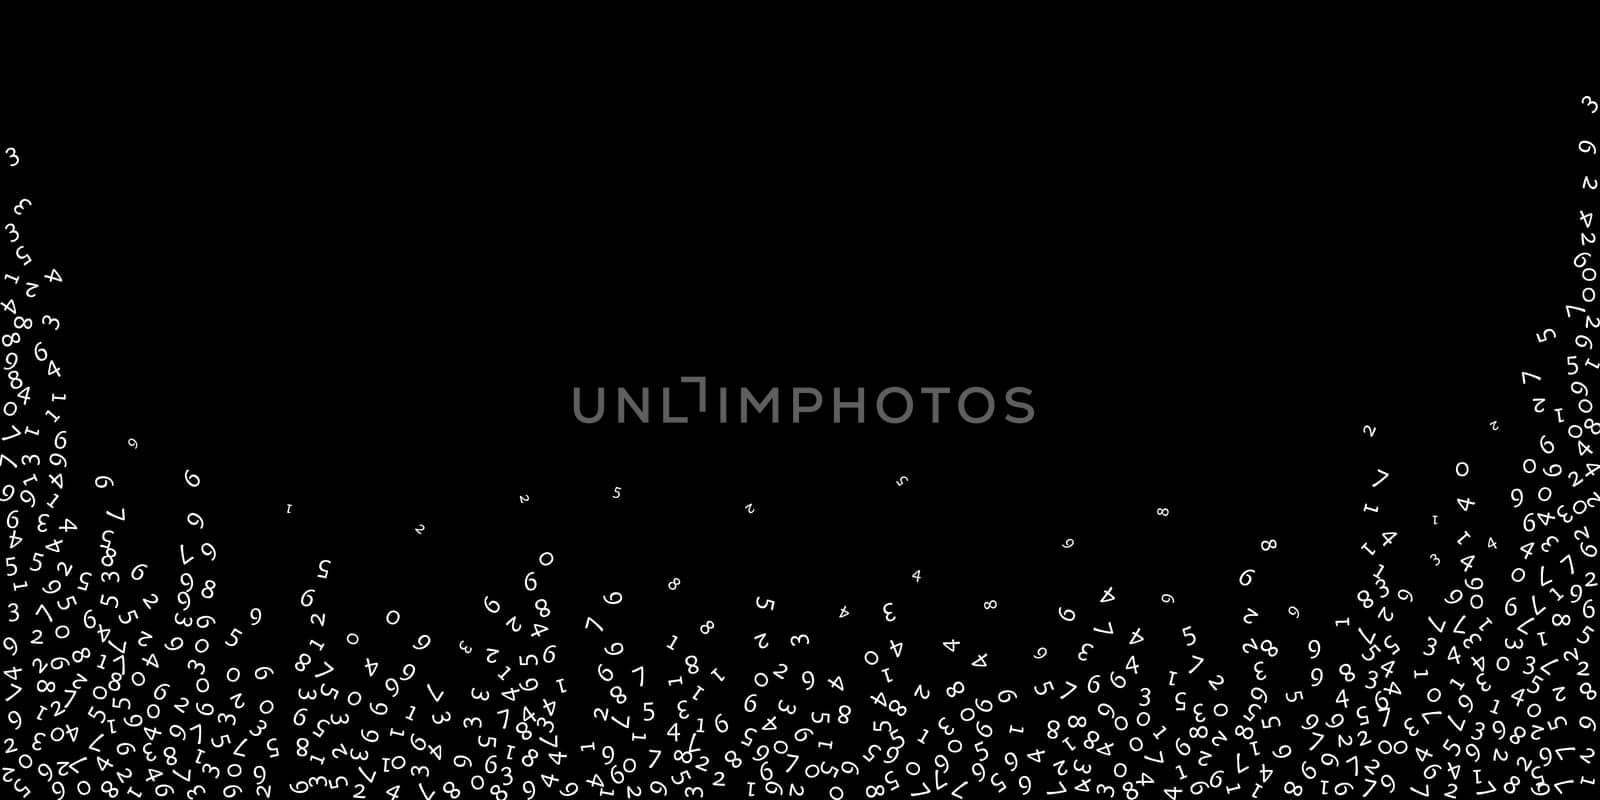 Falling numbers, big data concept. Binary white random flying digits. Marvelous futuristic banner on black background. Digital illustration with falling numbers.